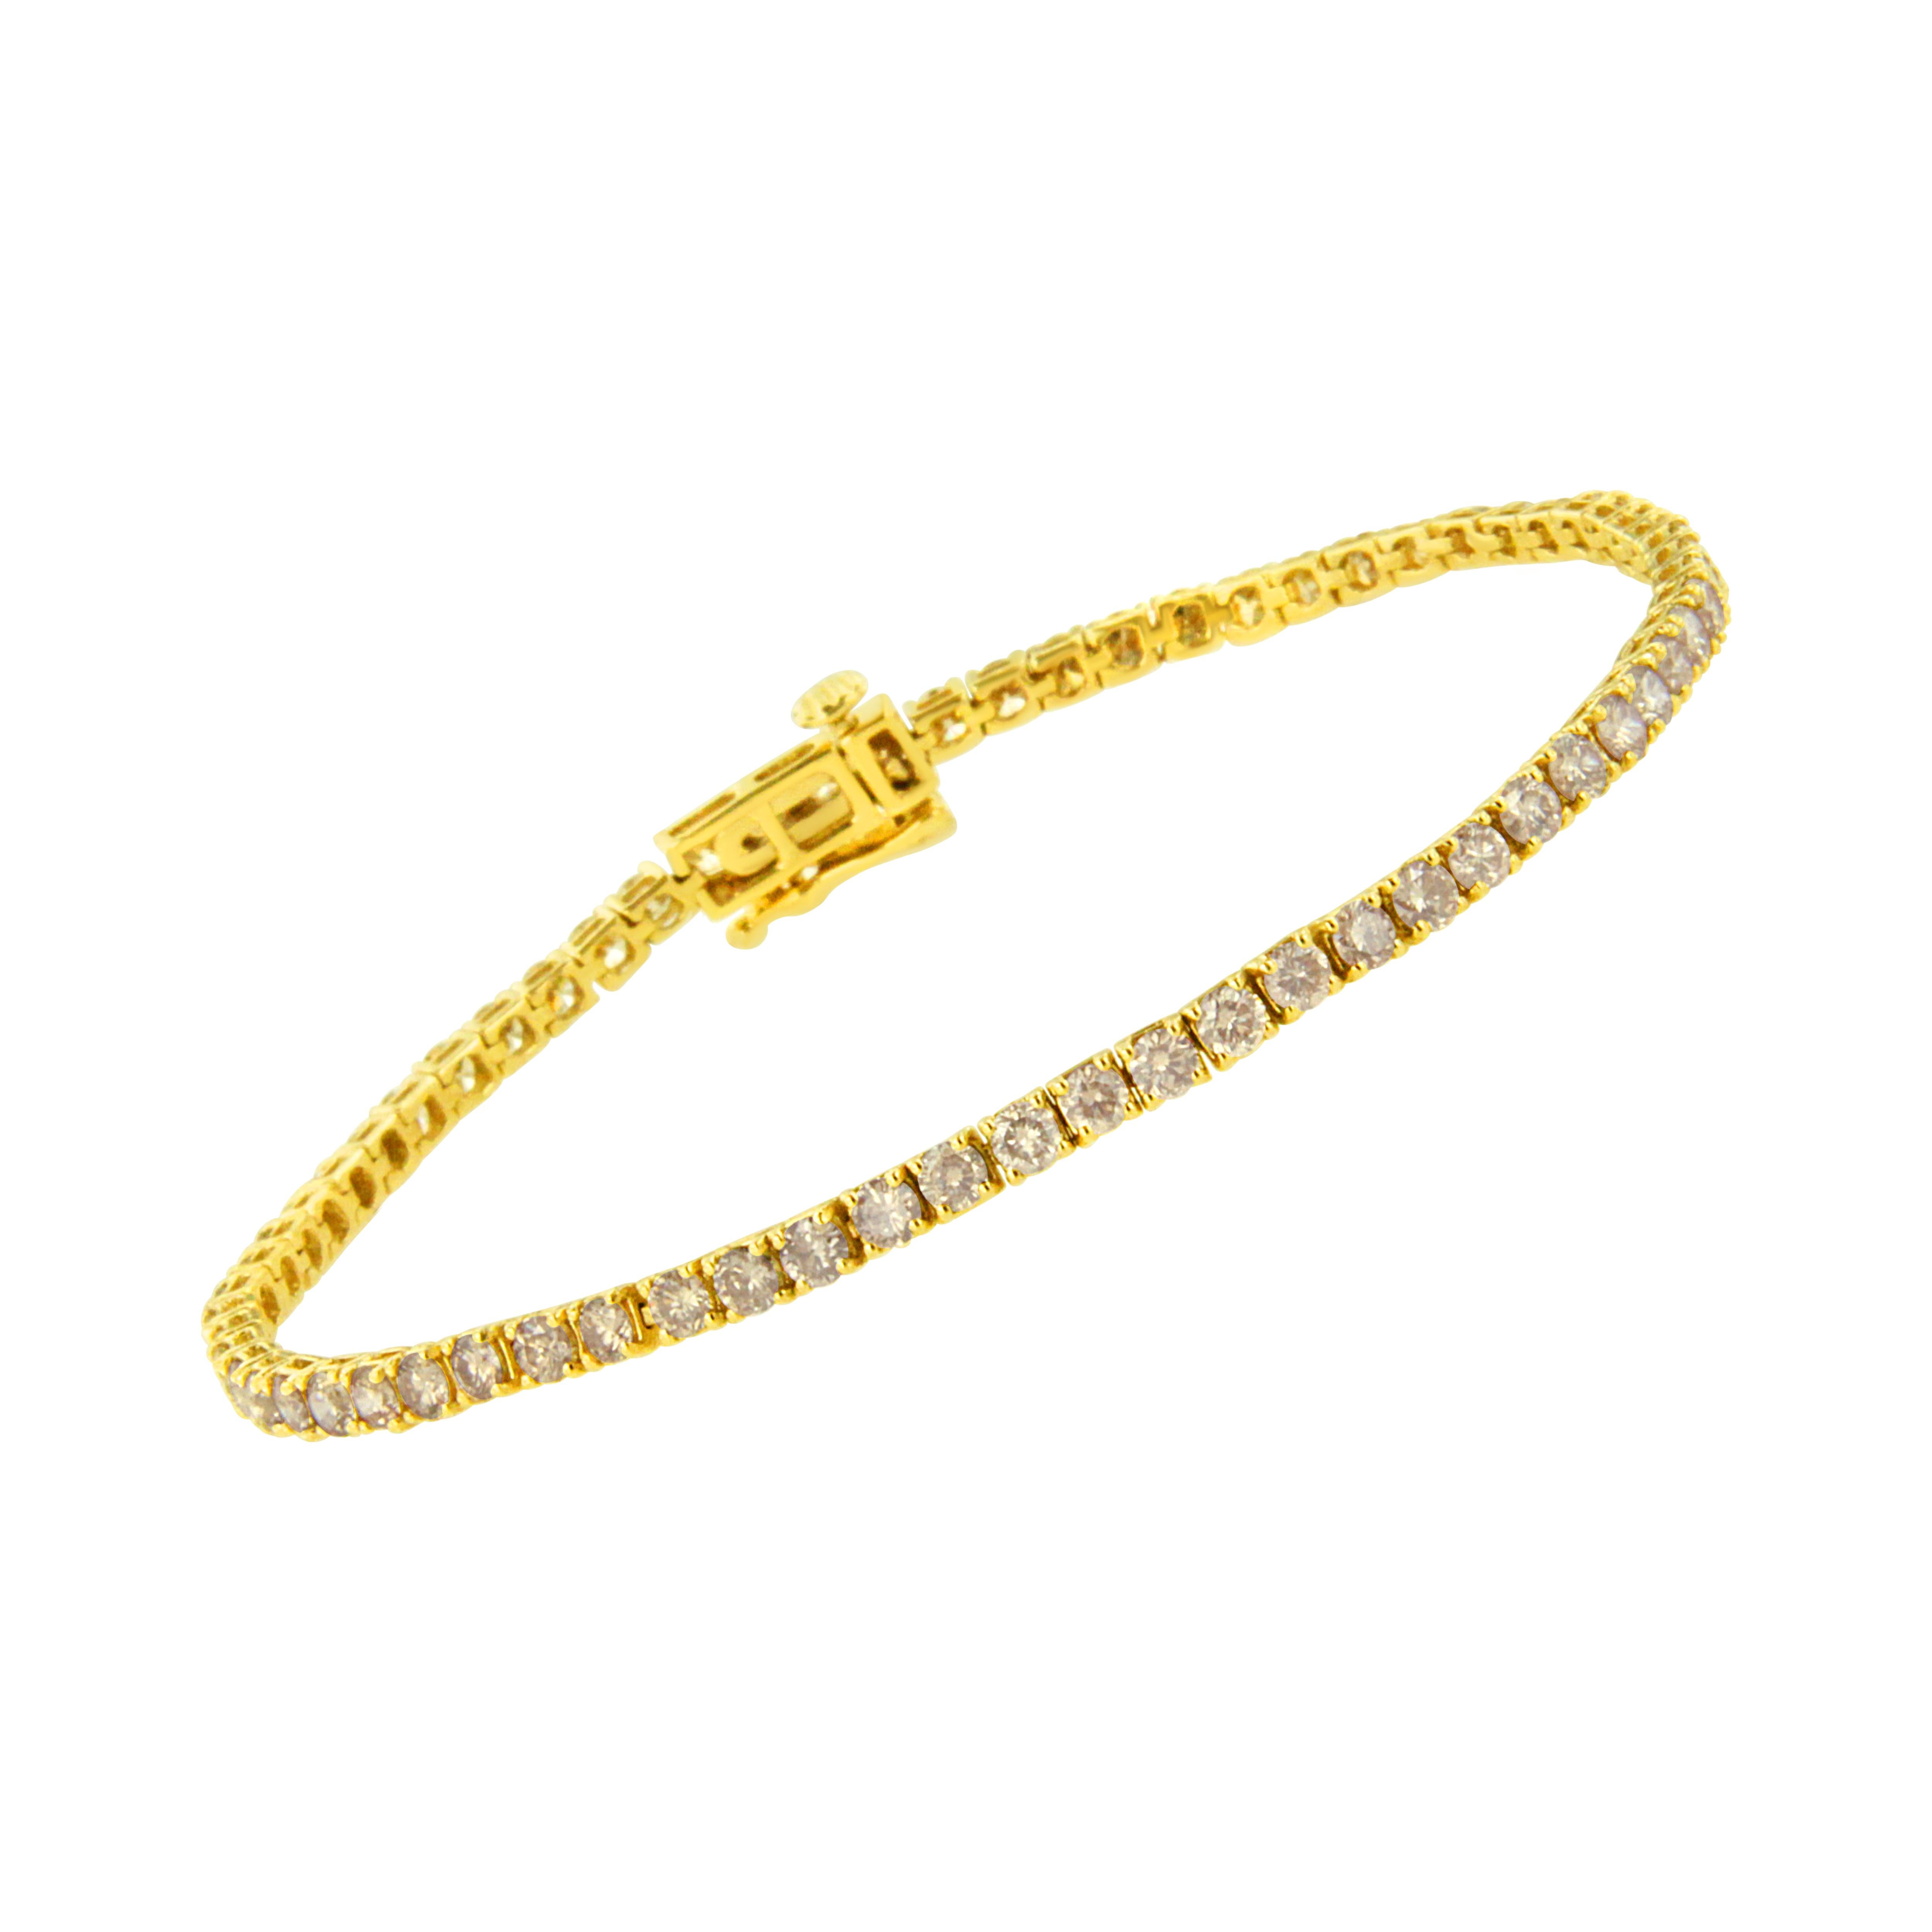 You can't go wrong with this 14k yellow gold plated .925 sterling silver tennis bracelet. This classic piece is embellished with stunning 4-prong set k-l color diamonds. The natural, round-cut diamonds shine in this 4 cttw bracelet, and will look